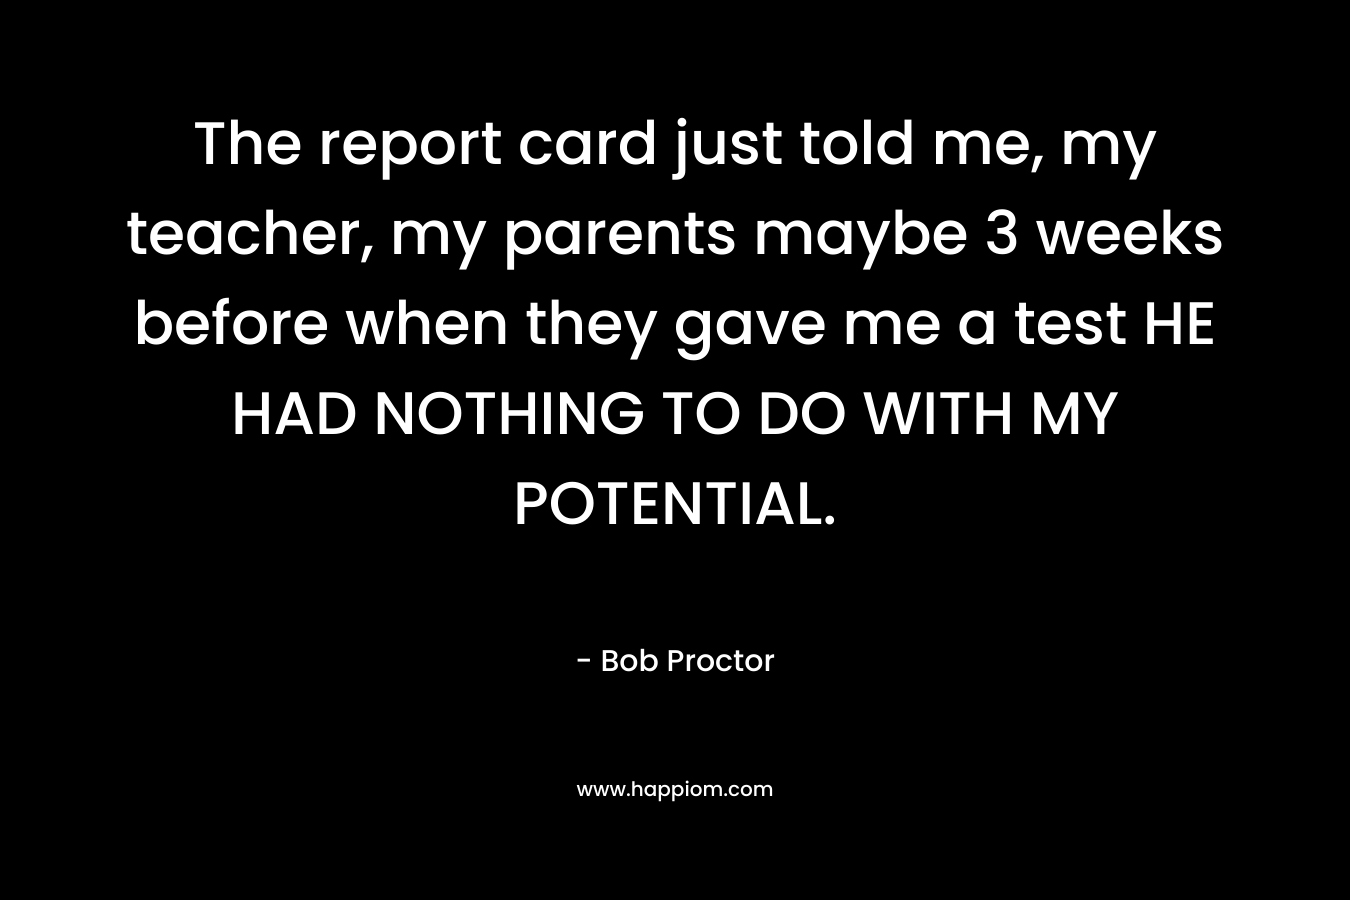 The report card just told me, my teacher, my parents maybe 3 weeks before when they gave me a test HE HAD NOTHING TO DO WITH MY POTENTIAL. – Bob Proctor